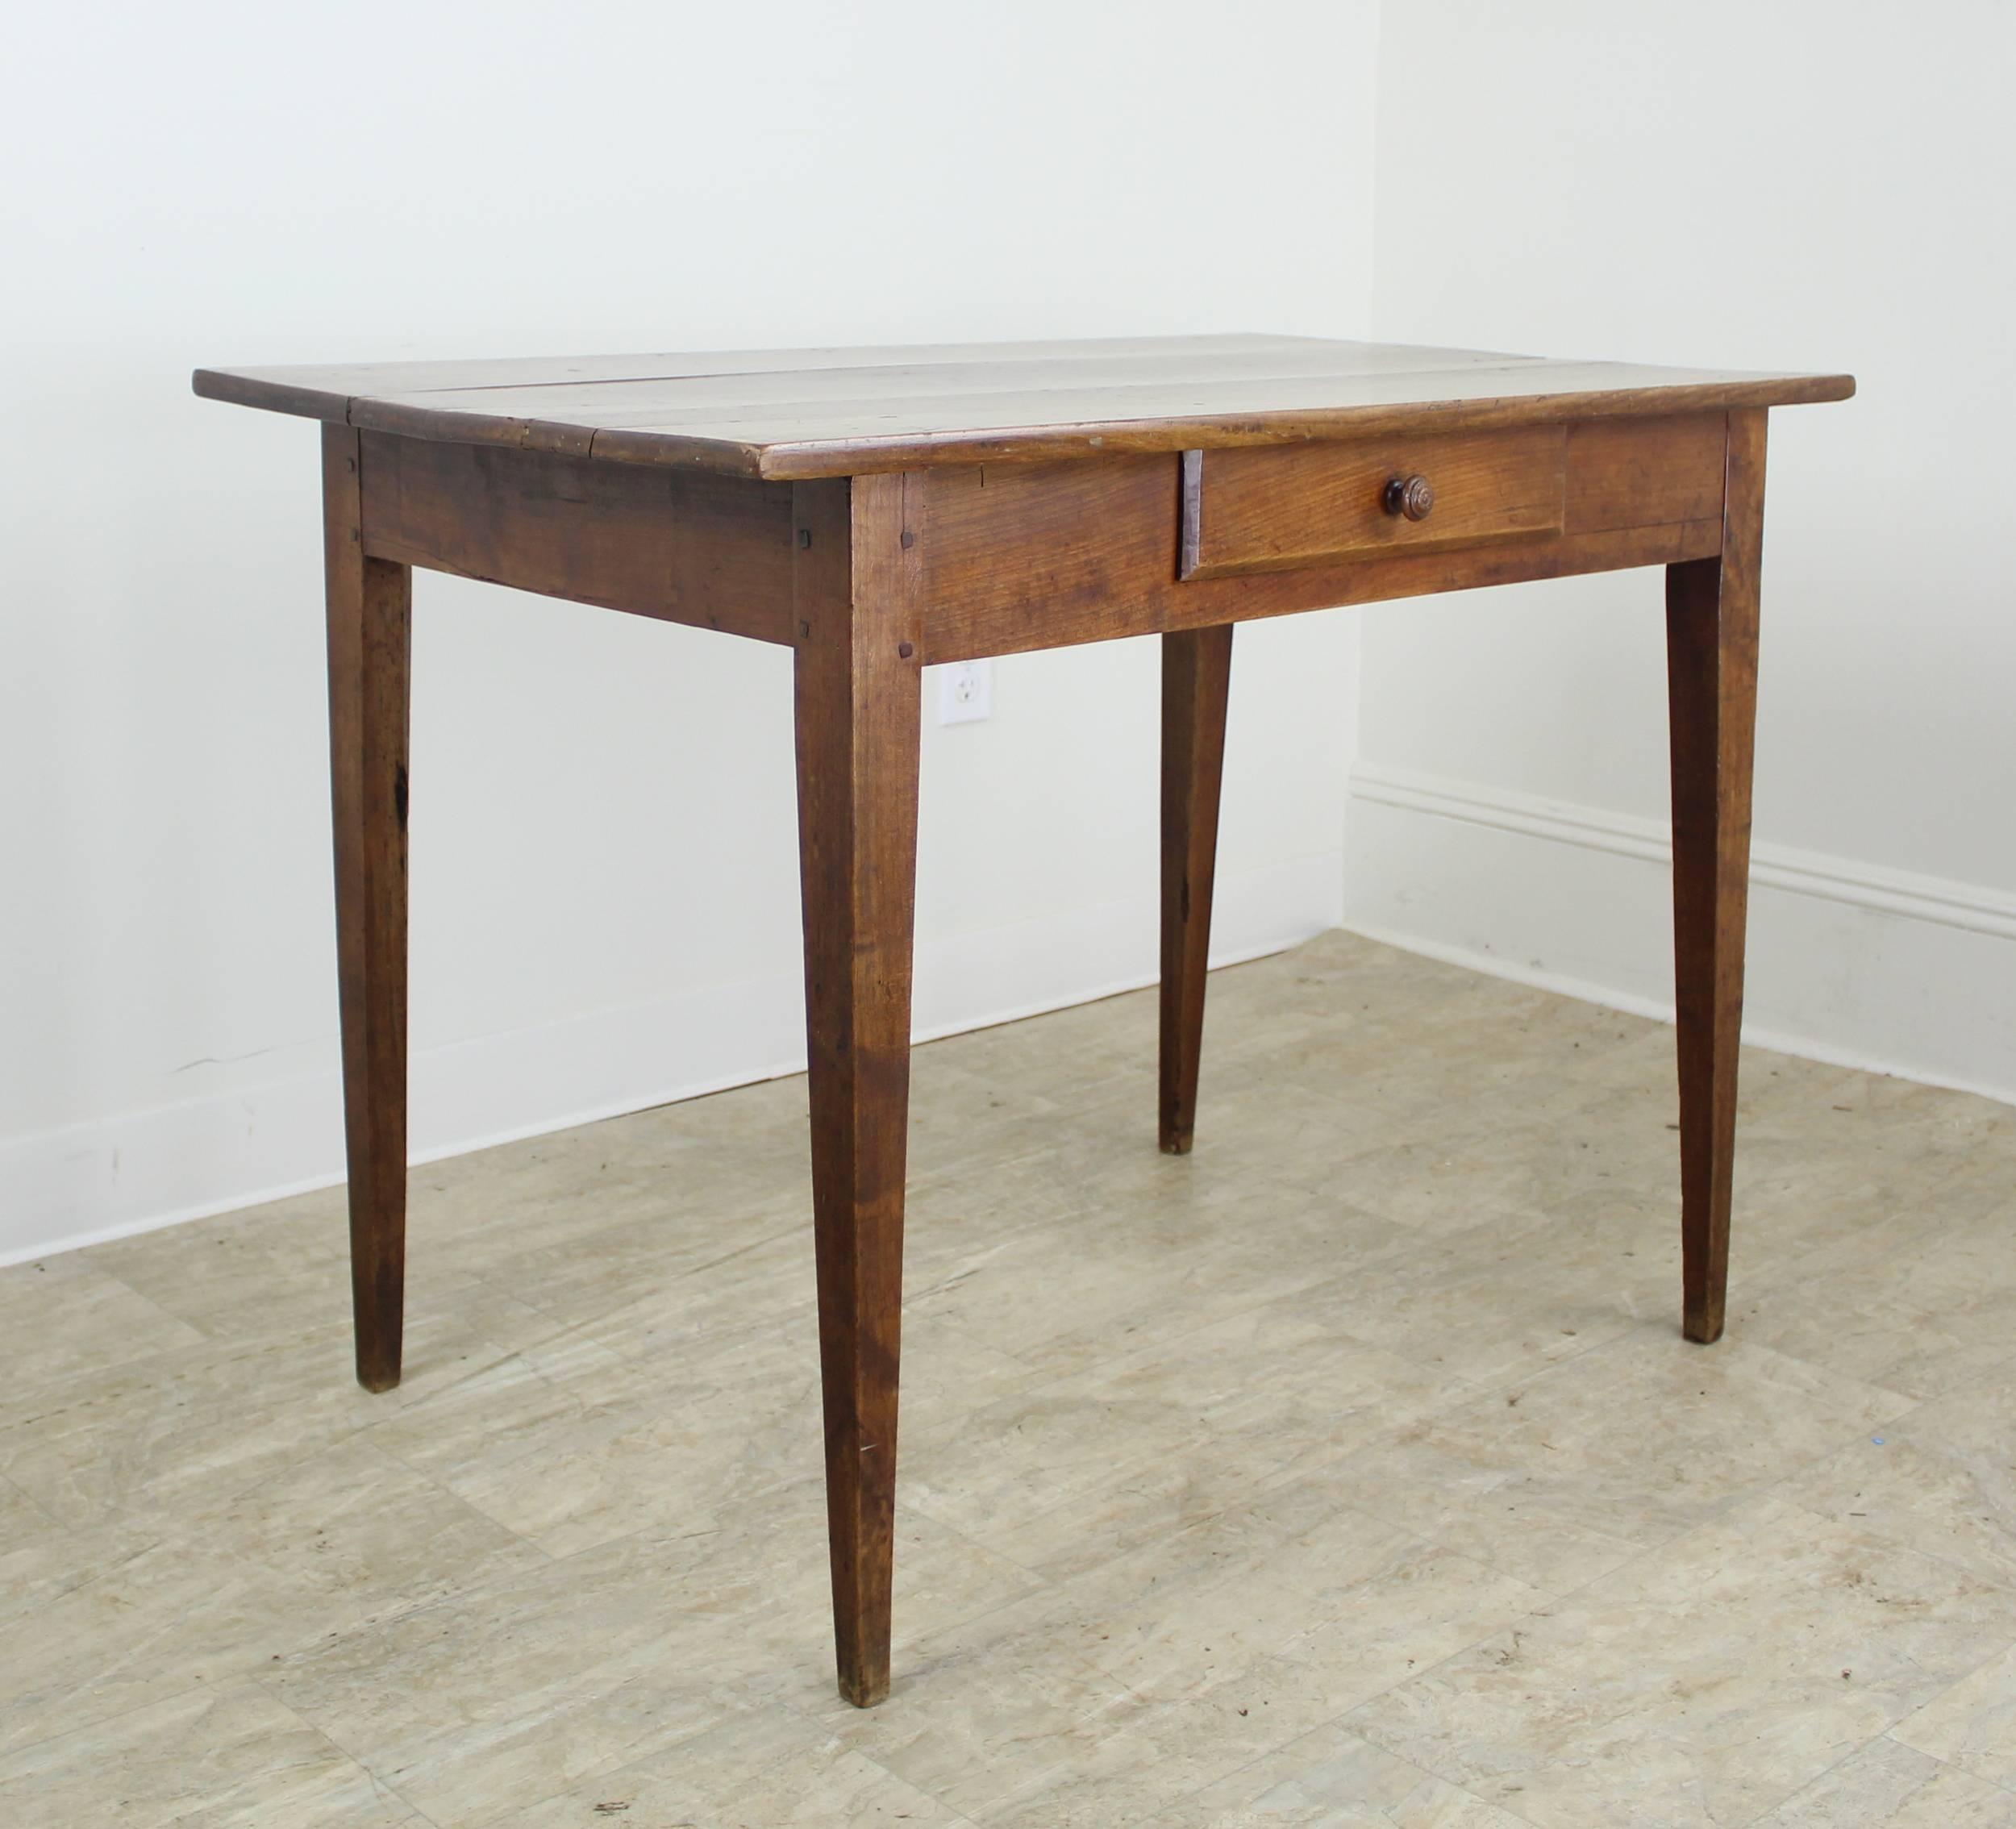 A refined writing table or desk in mellow cherry. Classic single drawer construction with tapered legs, lovely grain, and good patina. Measure: 24.5 inch apron height is good for knees. Very sturdy.